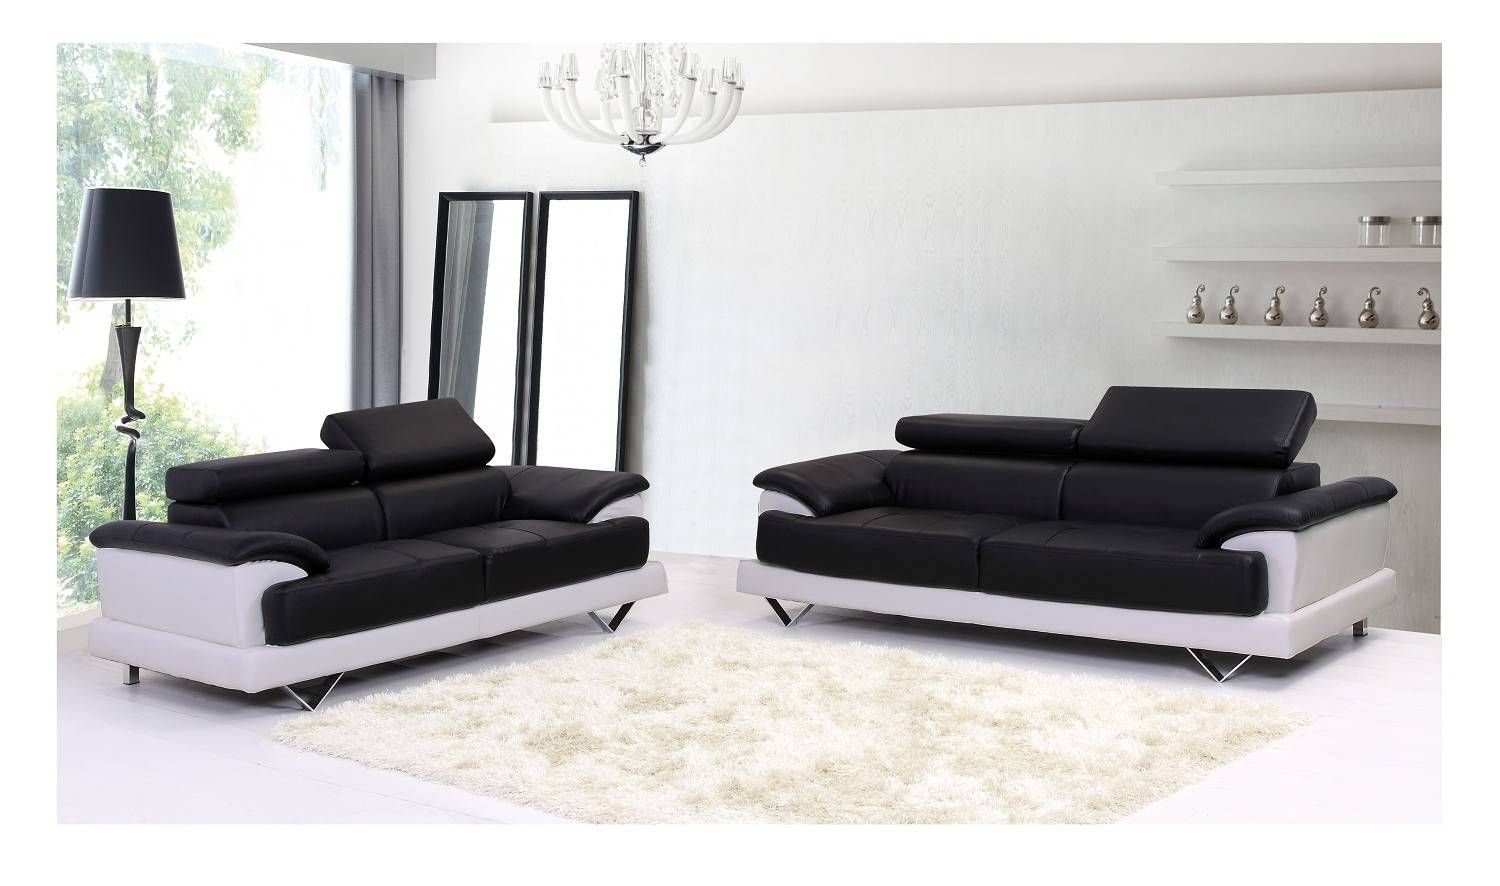 Leather Sofa At Isofas | Latest Designer Leather Sofas In Bonded Leather Sofas (View 8 of 15)